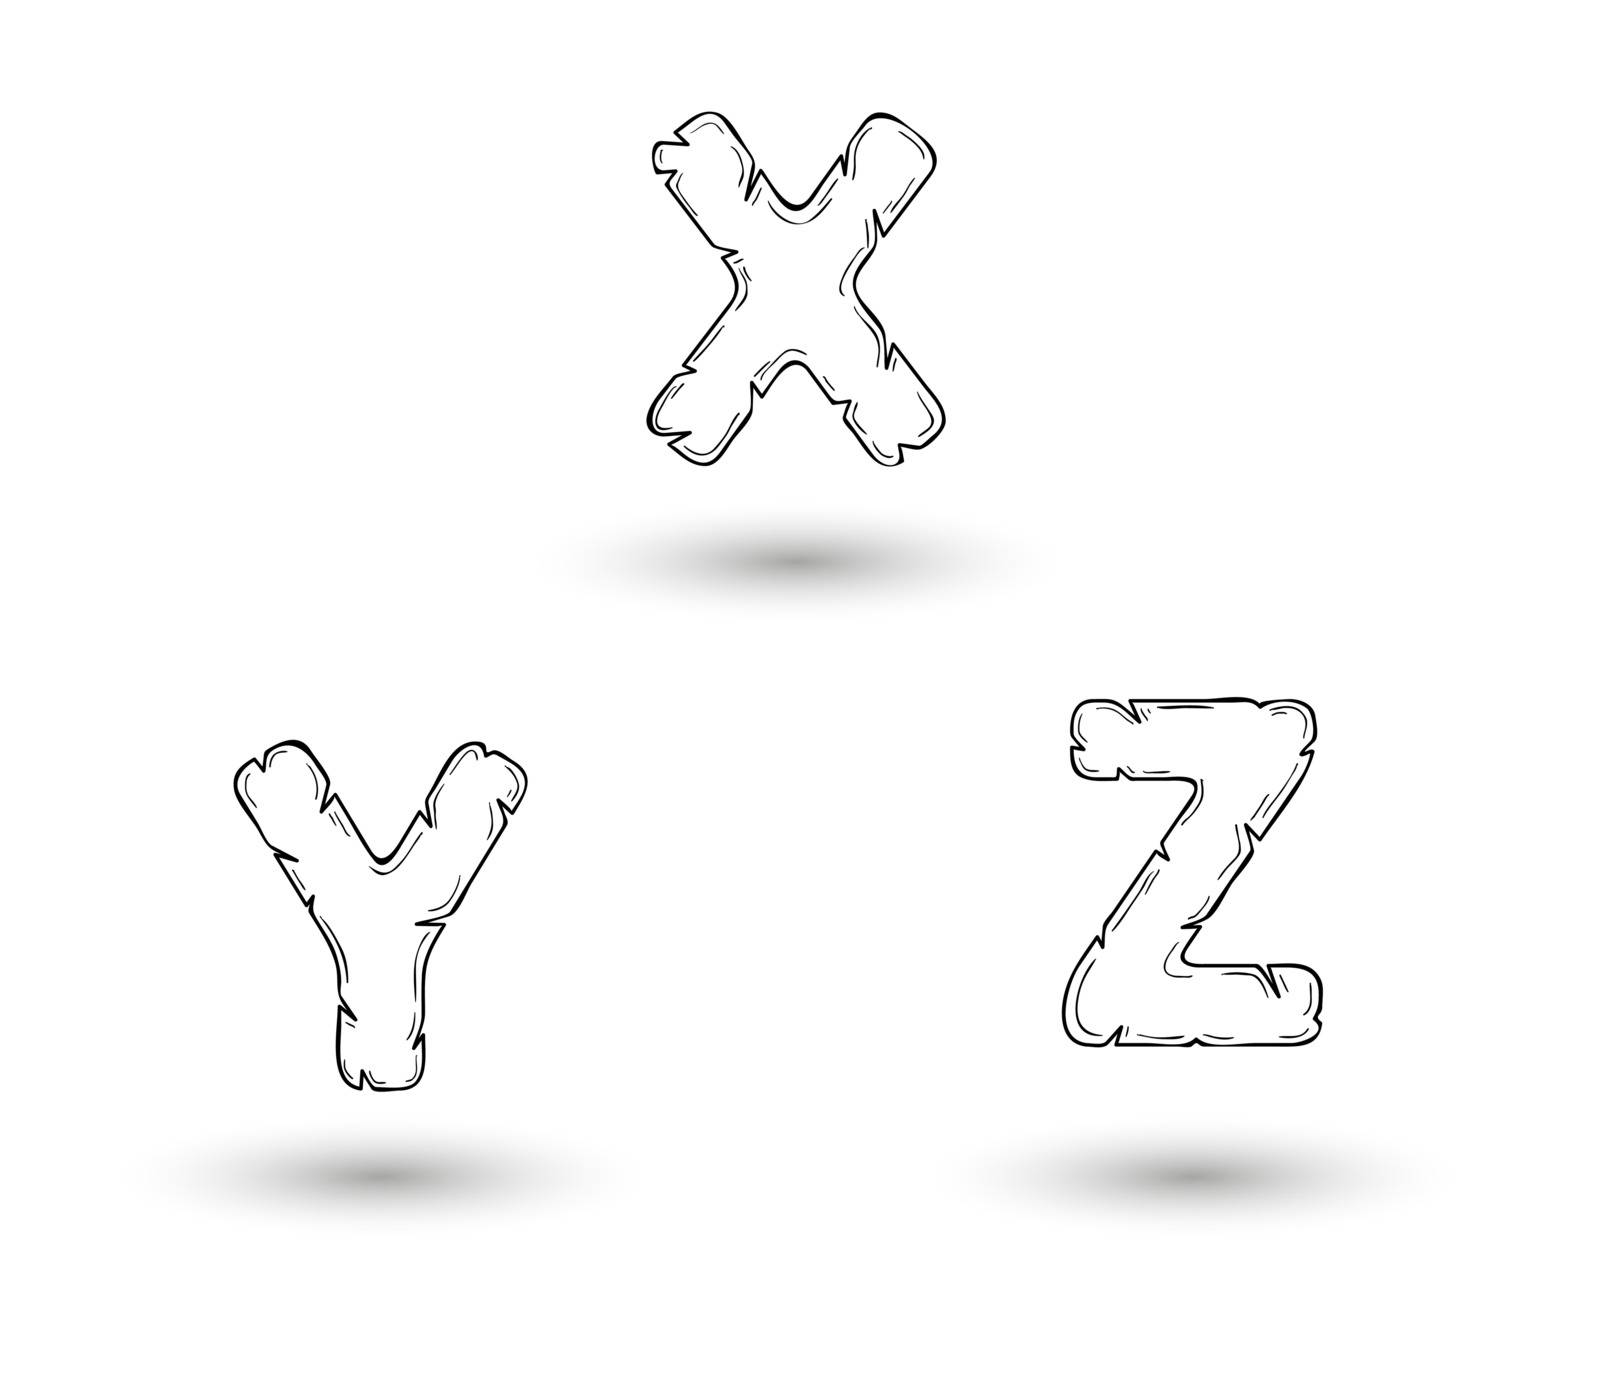 sketch jagged alphabet letters with shadow on white background, X, Y, Z